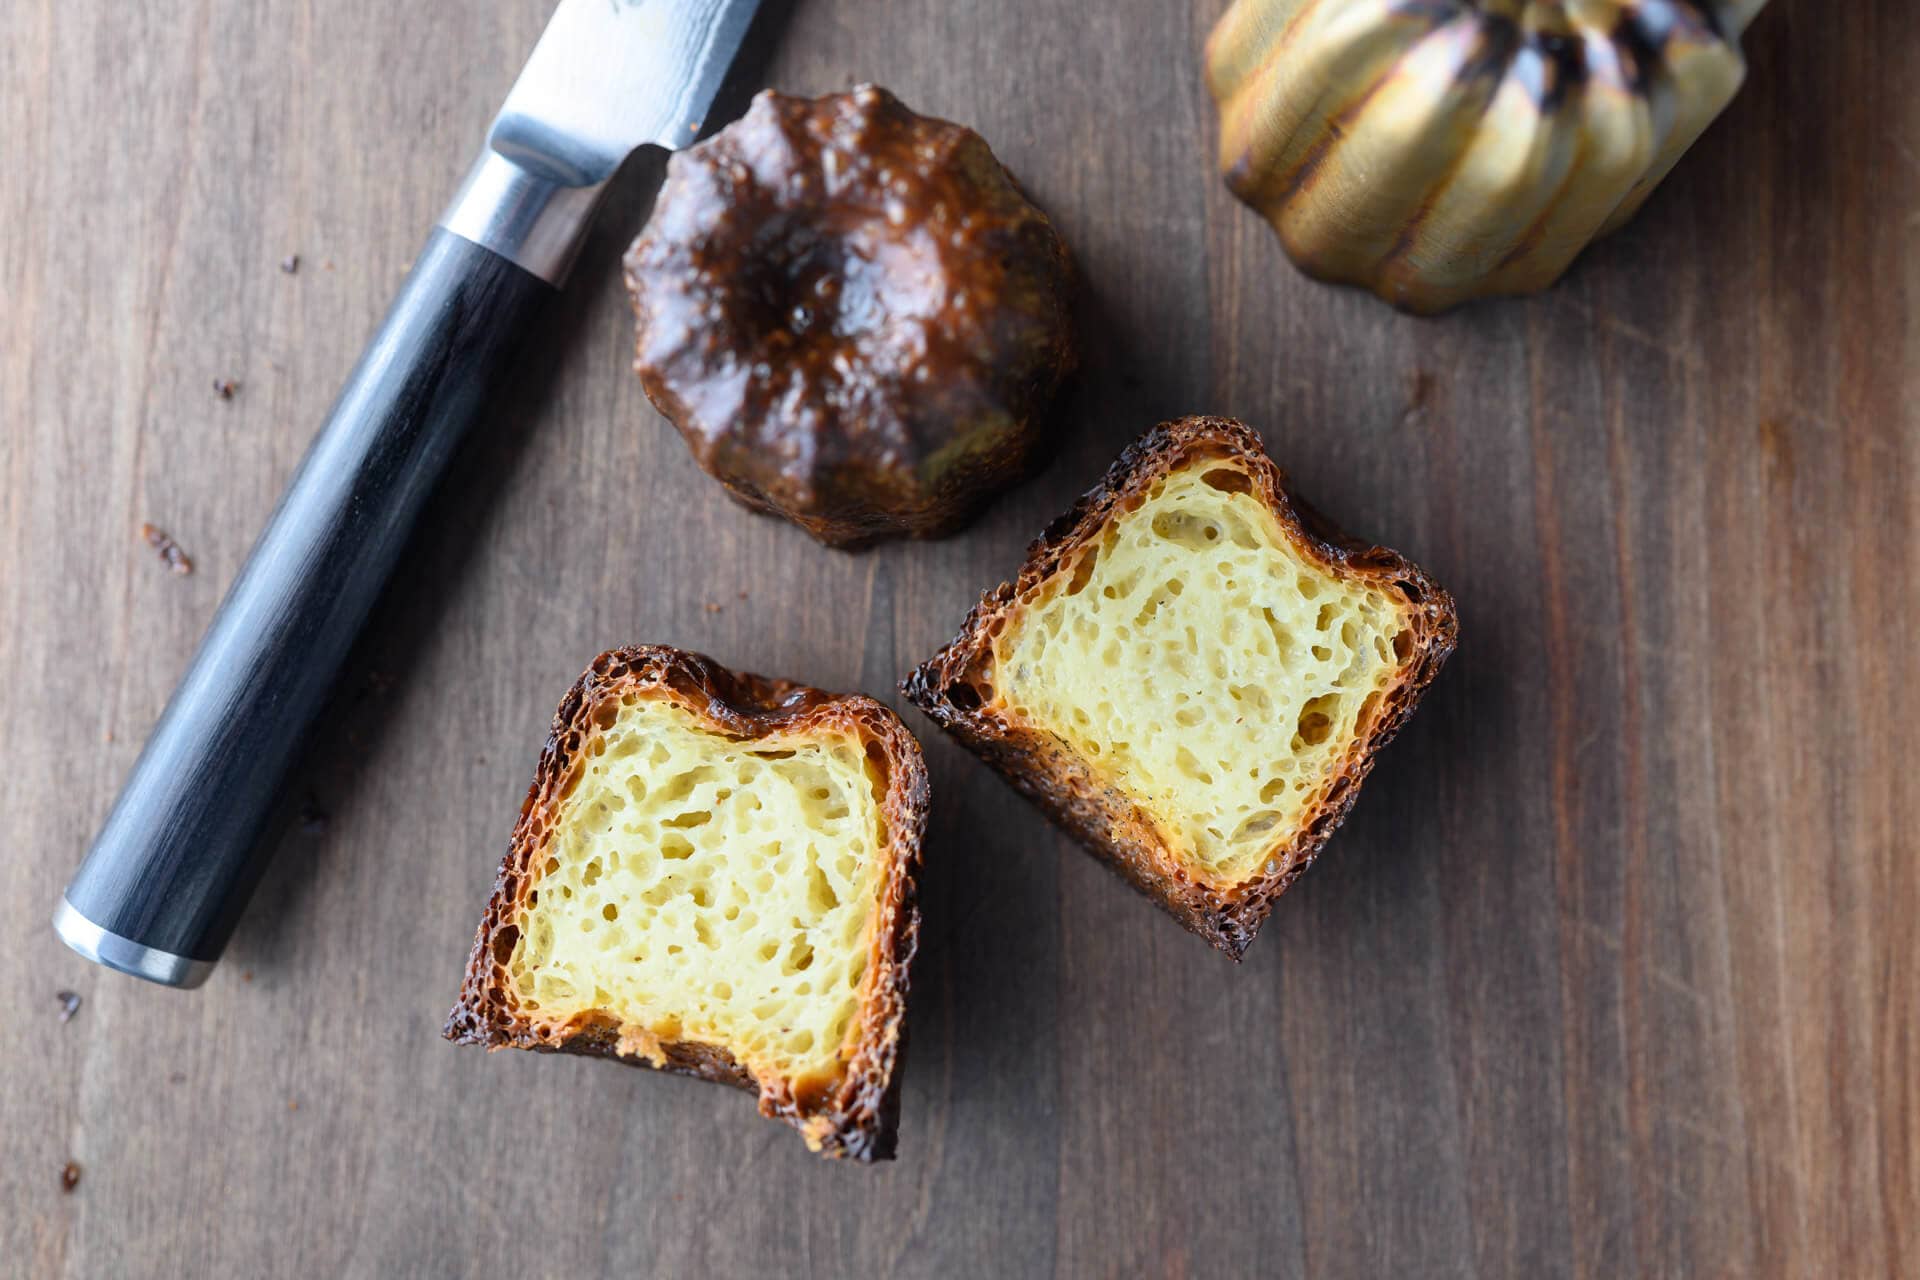 https://www.theperfectloaf.com/wp-content/uploads/2019/11/theperfectloaf-canele-5.jpg